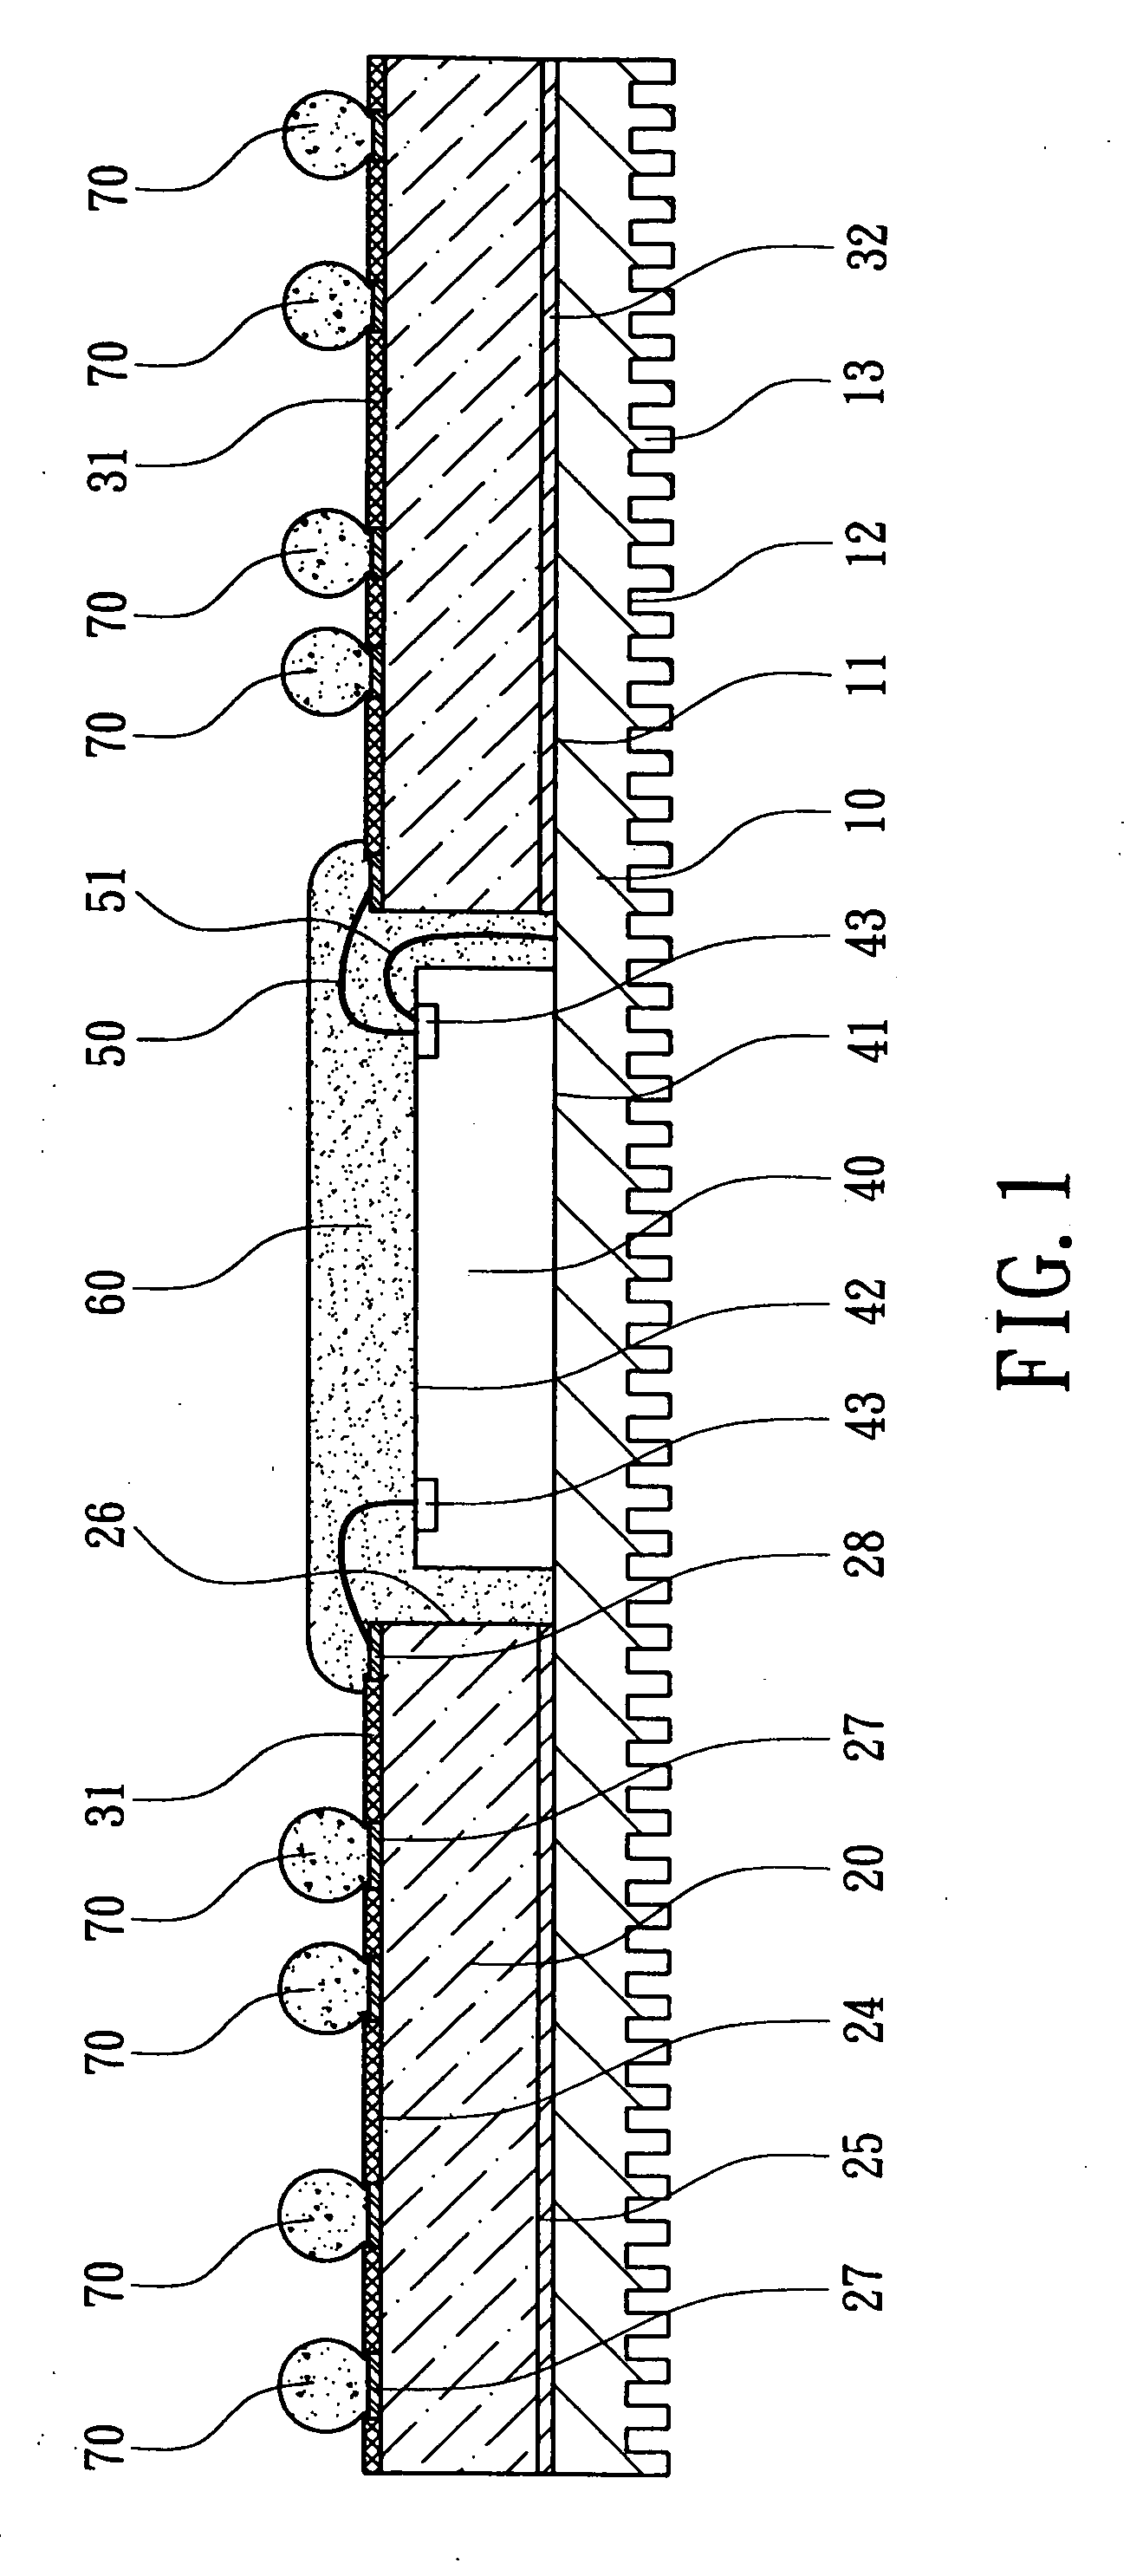 Cavity-down semiconductor package with heat spreader